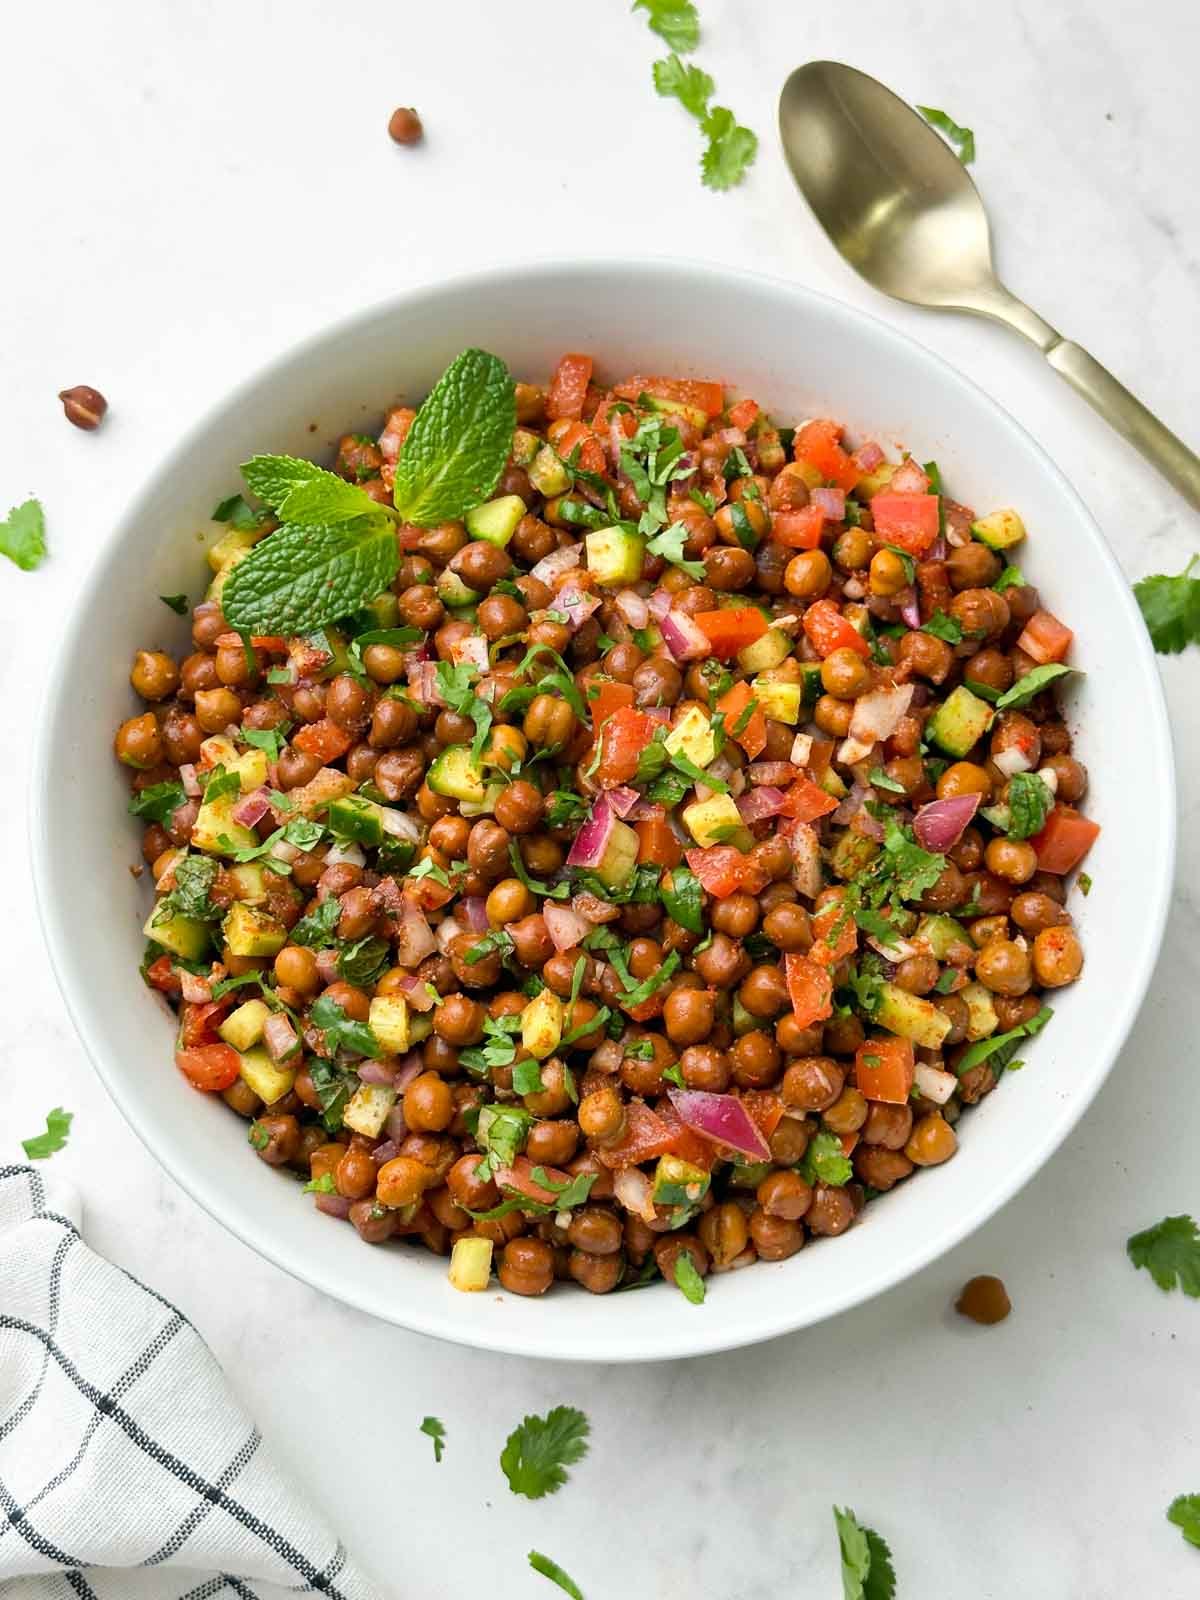 kala chana salad (black chickpeas salad) served in a bowl garnished with mint and spoon on the side